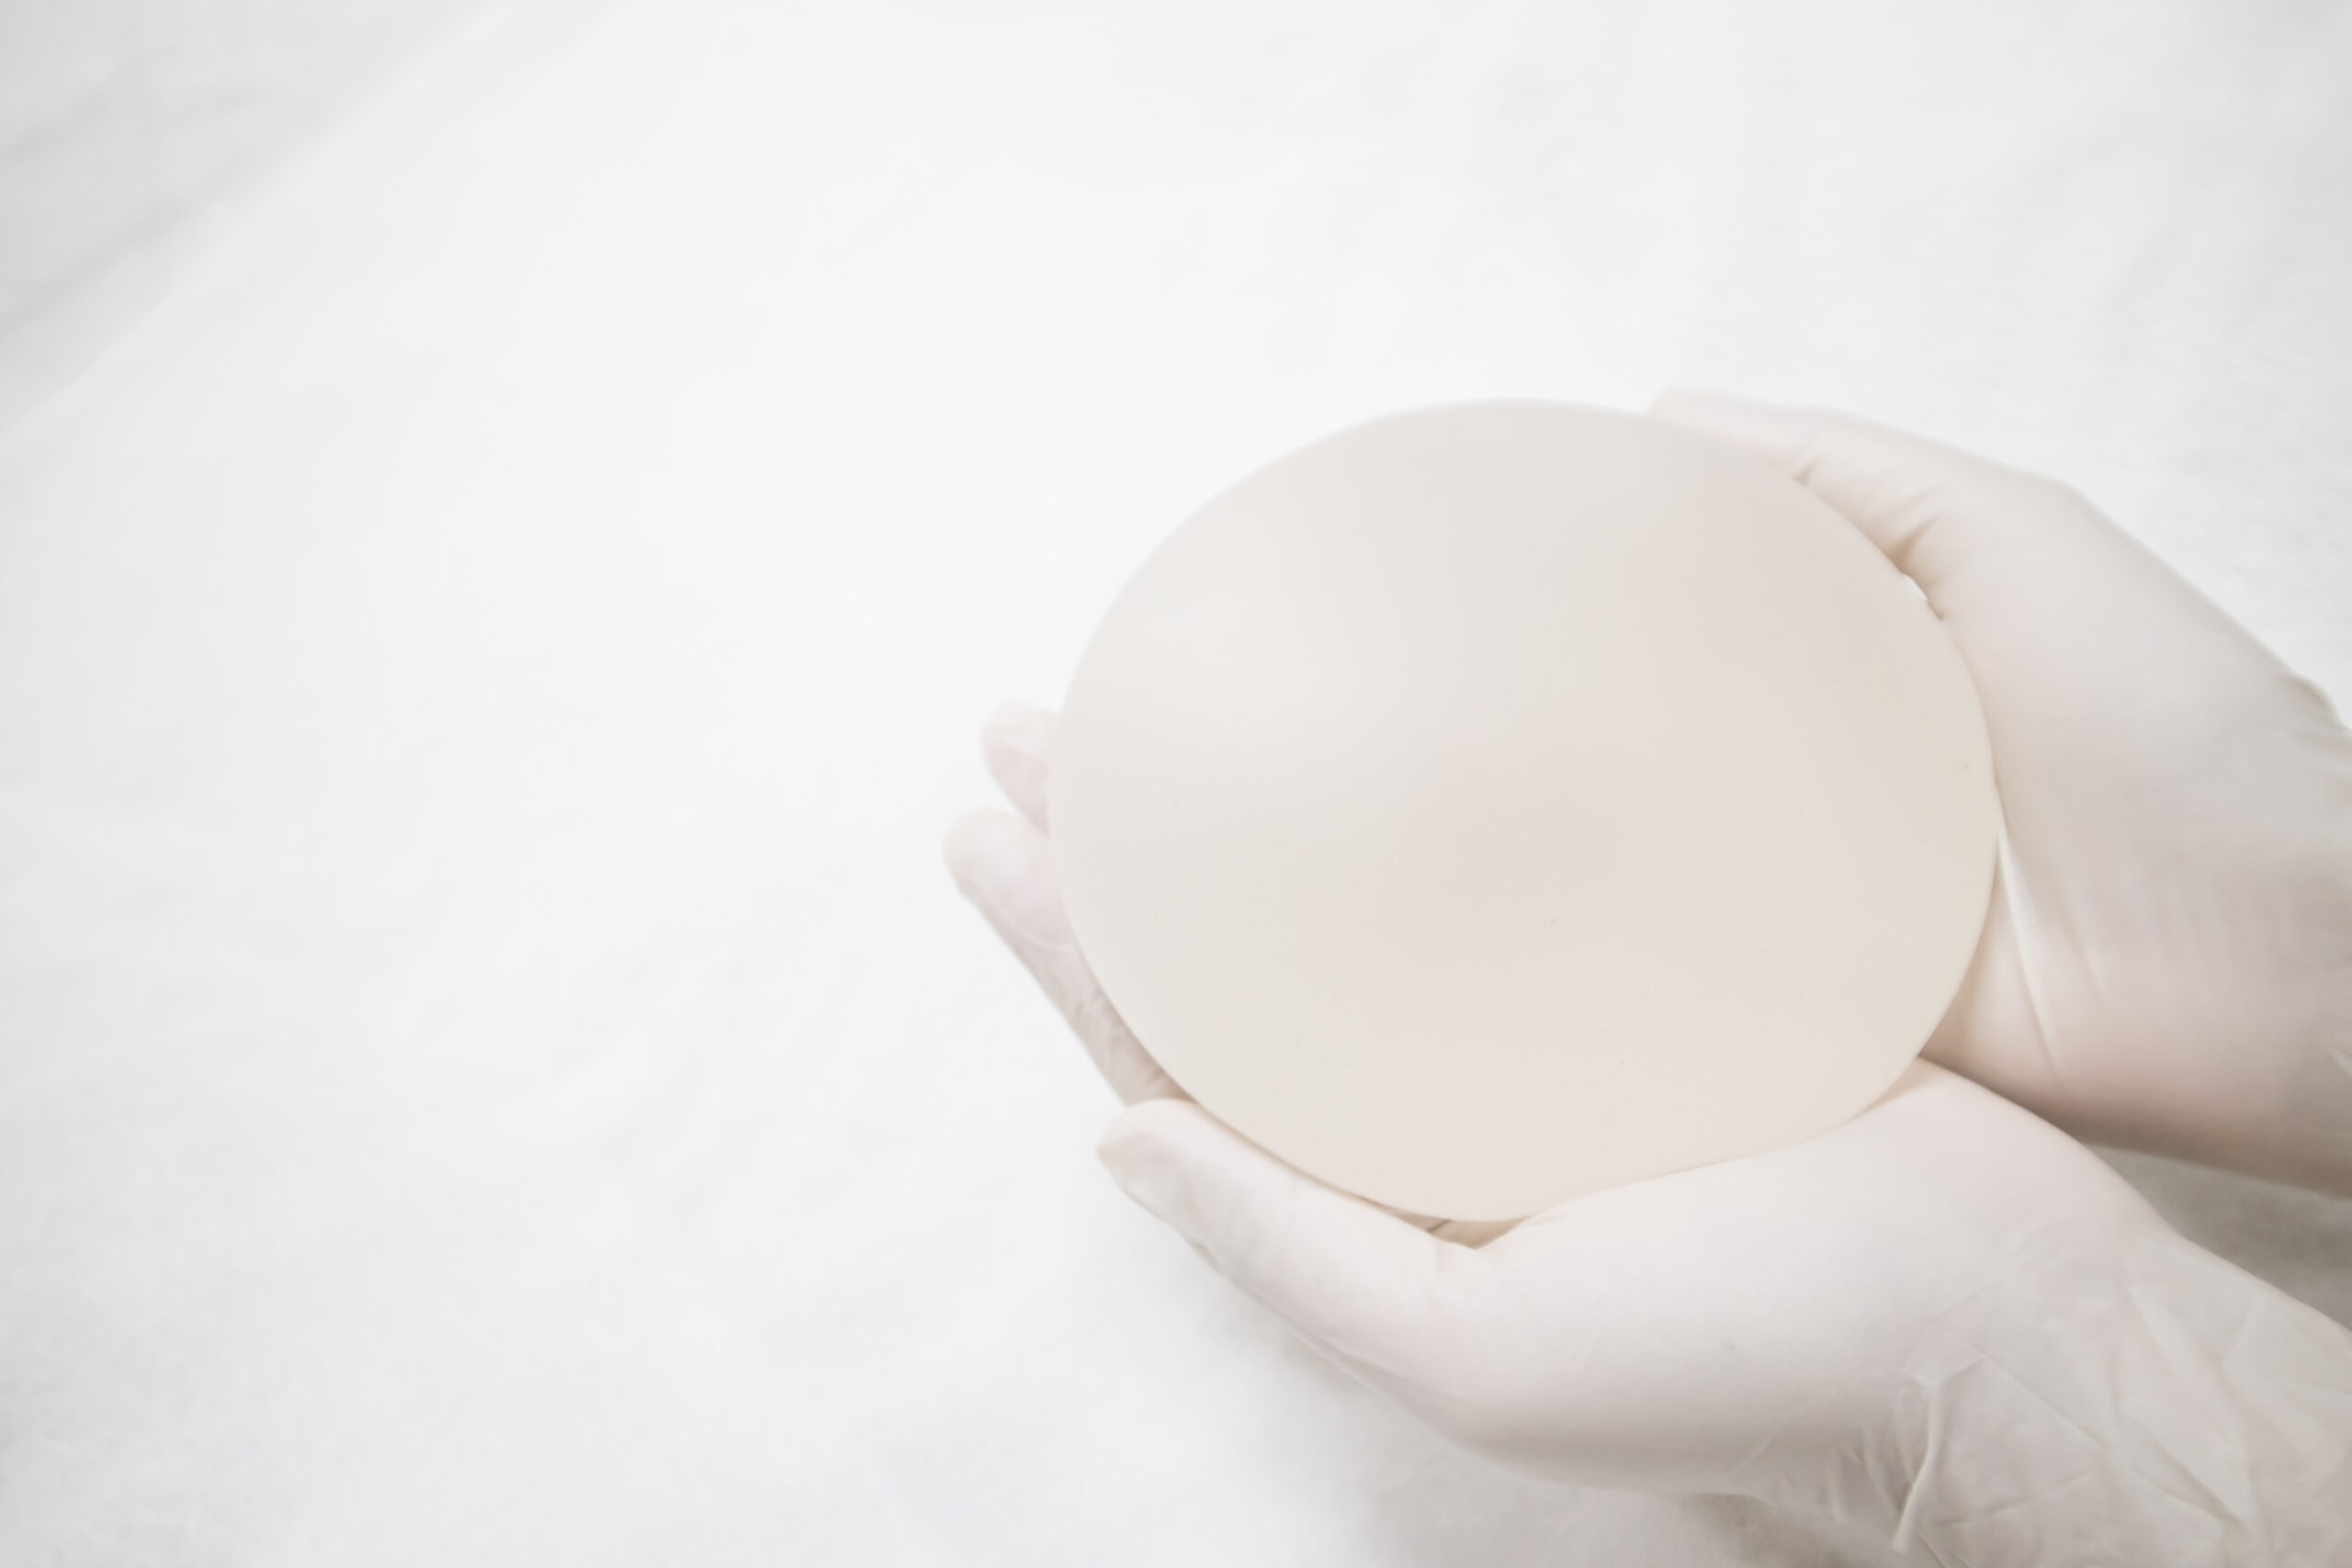 breast implants be replaced remove implants breast reduction breast implant removal breast implant exchange . Breast implant replacement